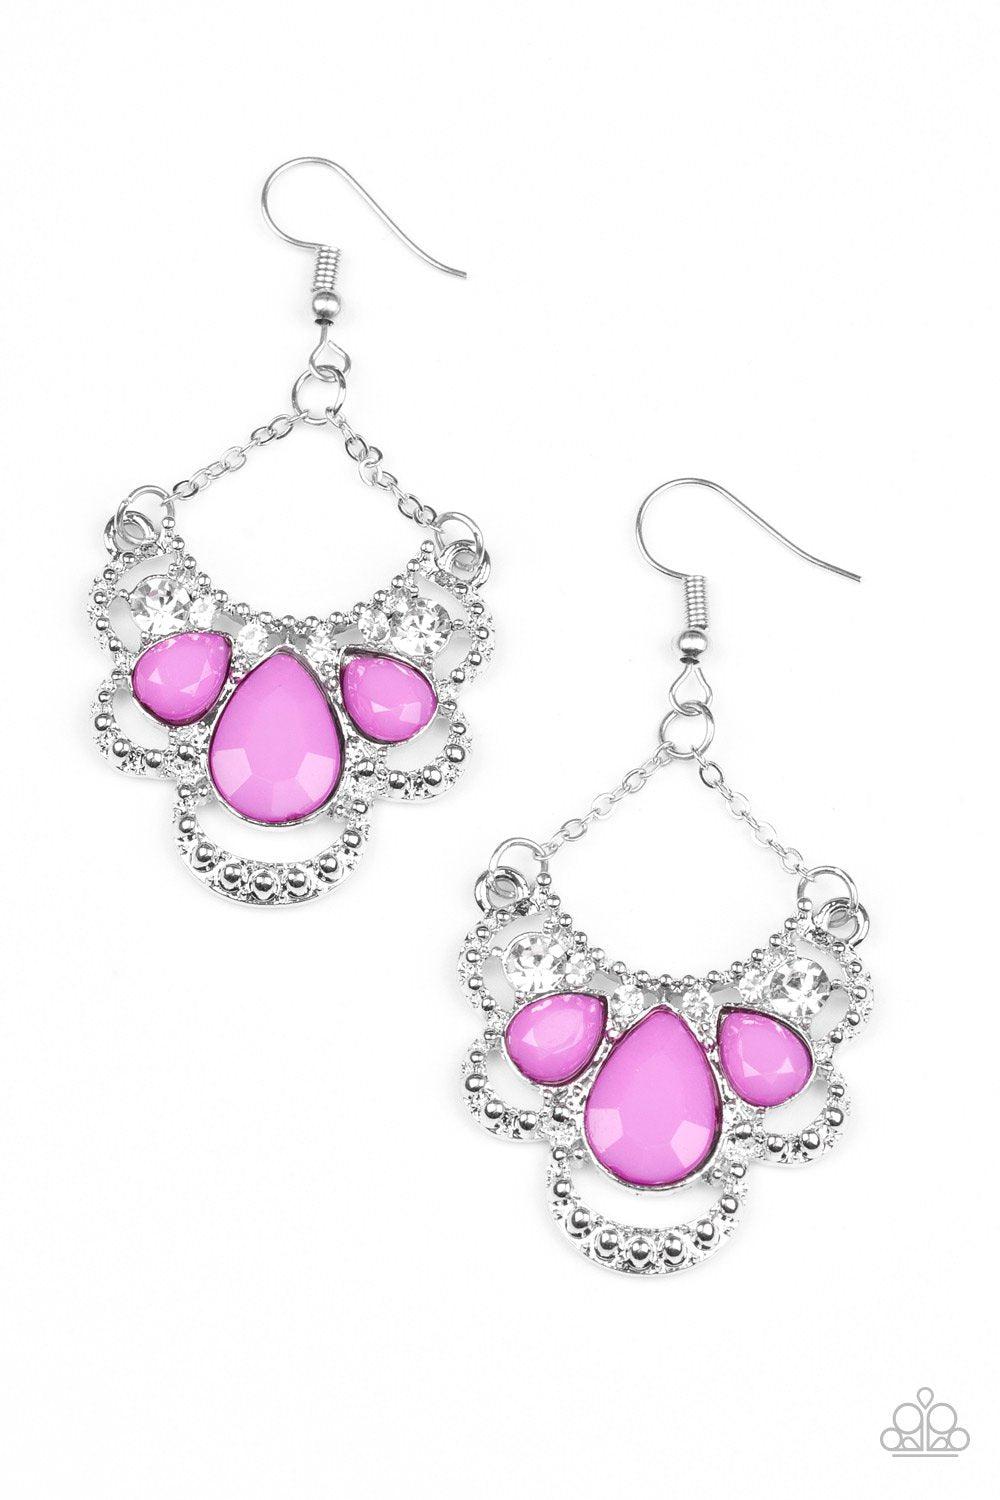 Caribbean Royalty Purple Earrings - Paparazzi Accessories-CarasShop.com - $5 Jewelry by Cara Jewels